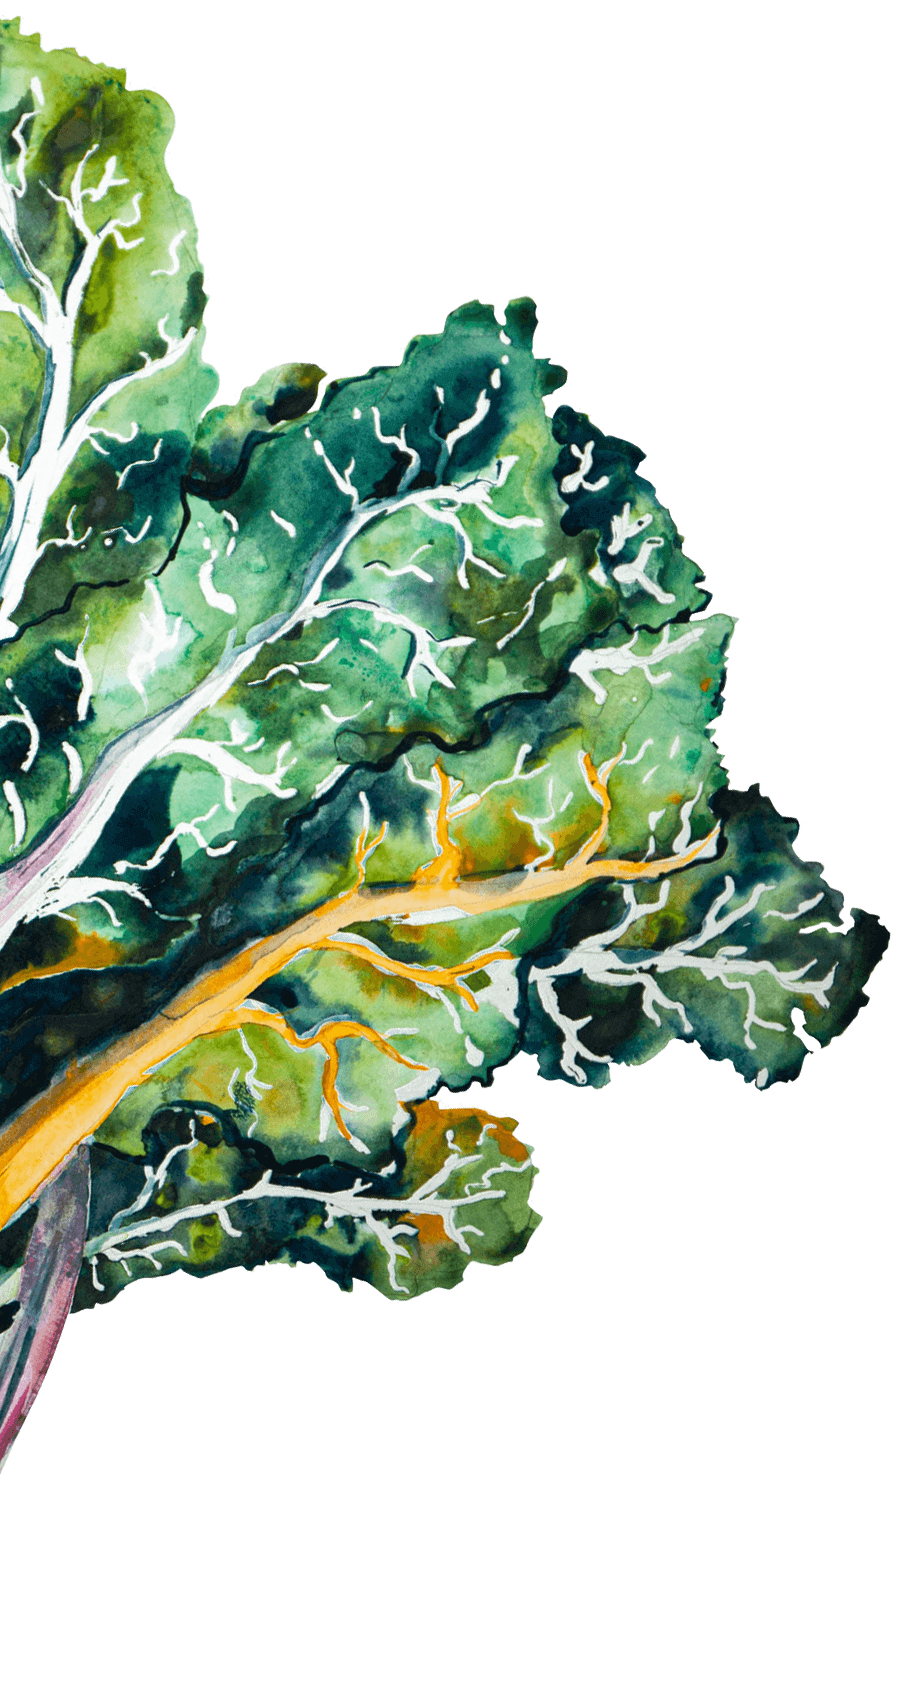 A saturated watercolor painting of lettuce peaking out of the left side.